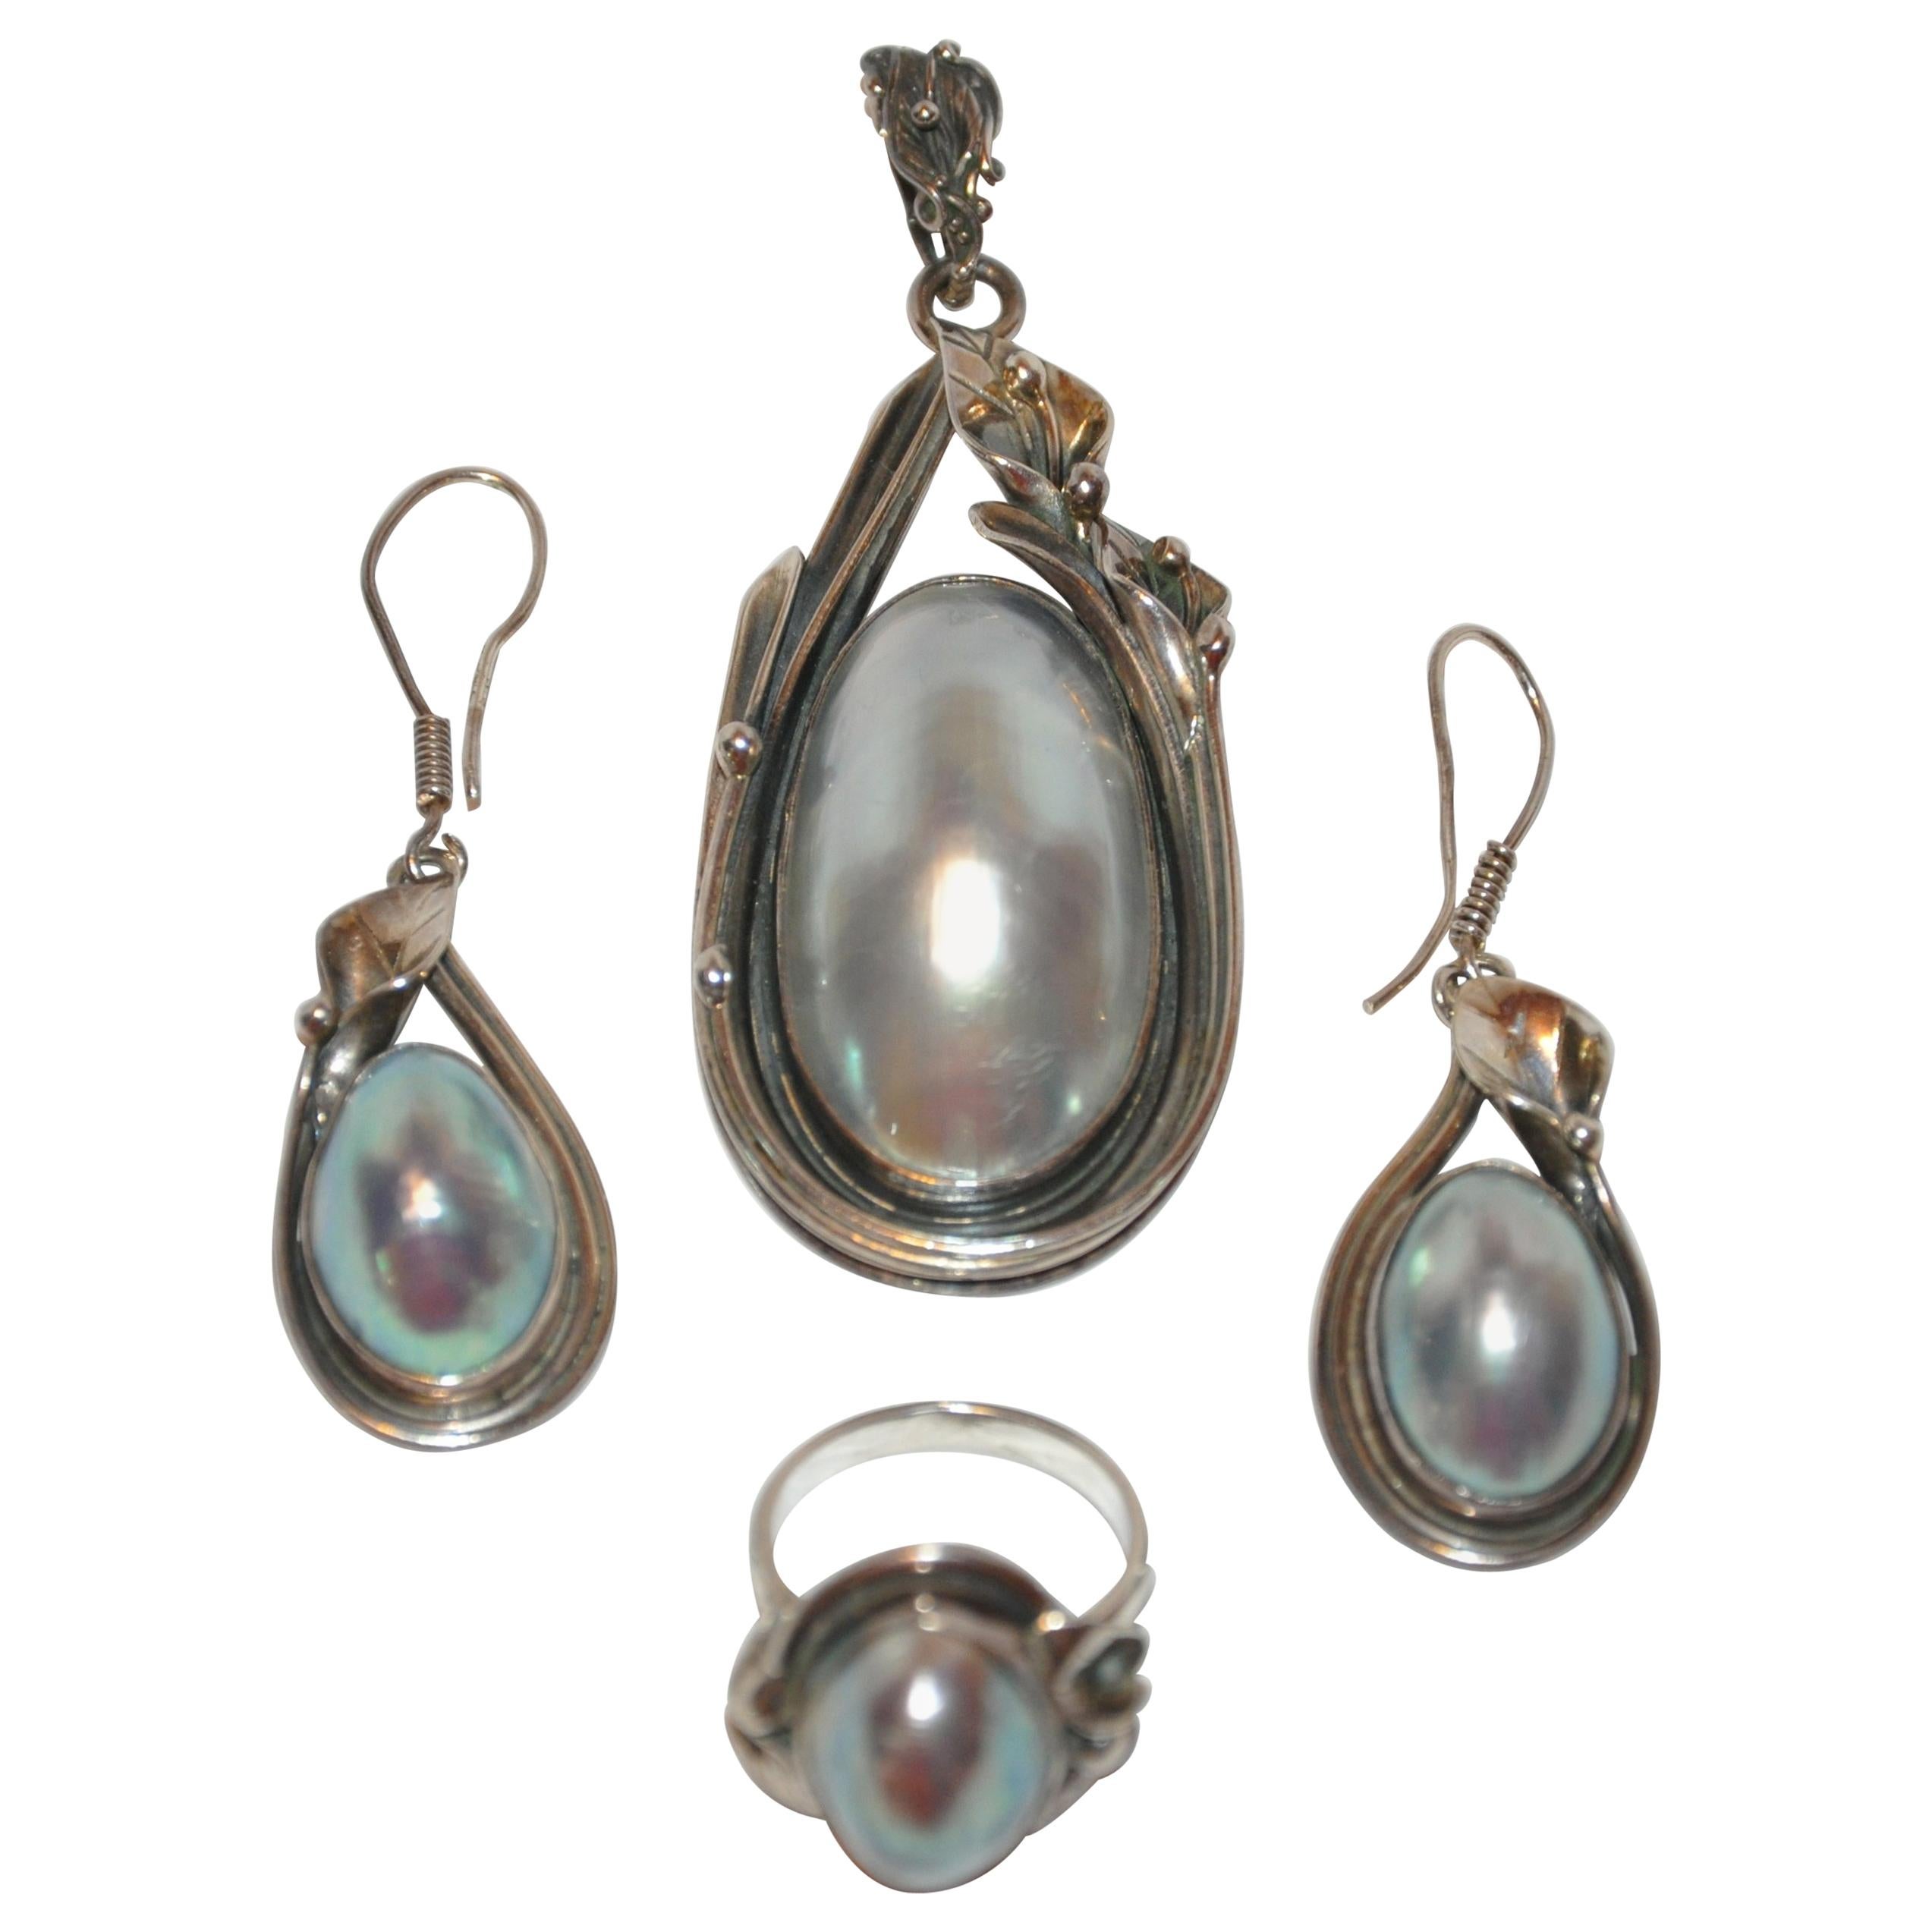 Exquisite Detailed Silver 925 & "Mother-of-Pearl" Pendant, Earrings and Ring Set